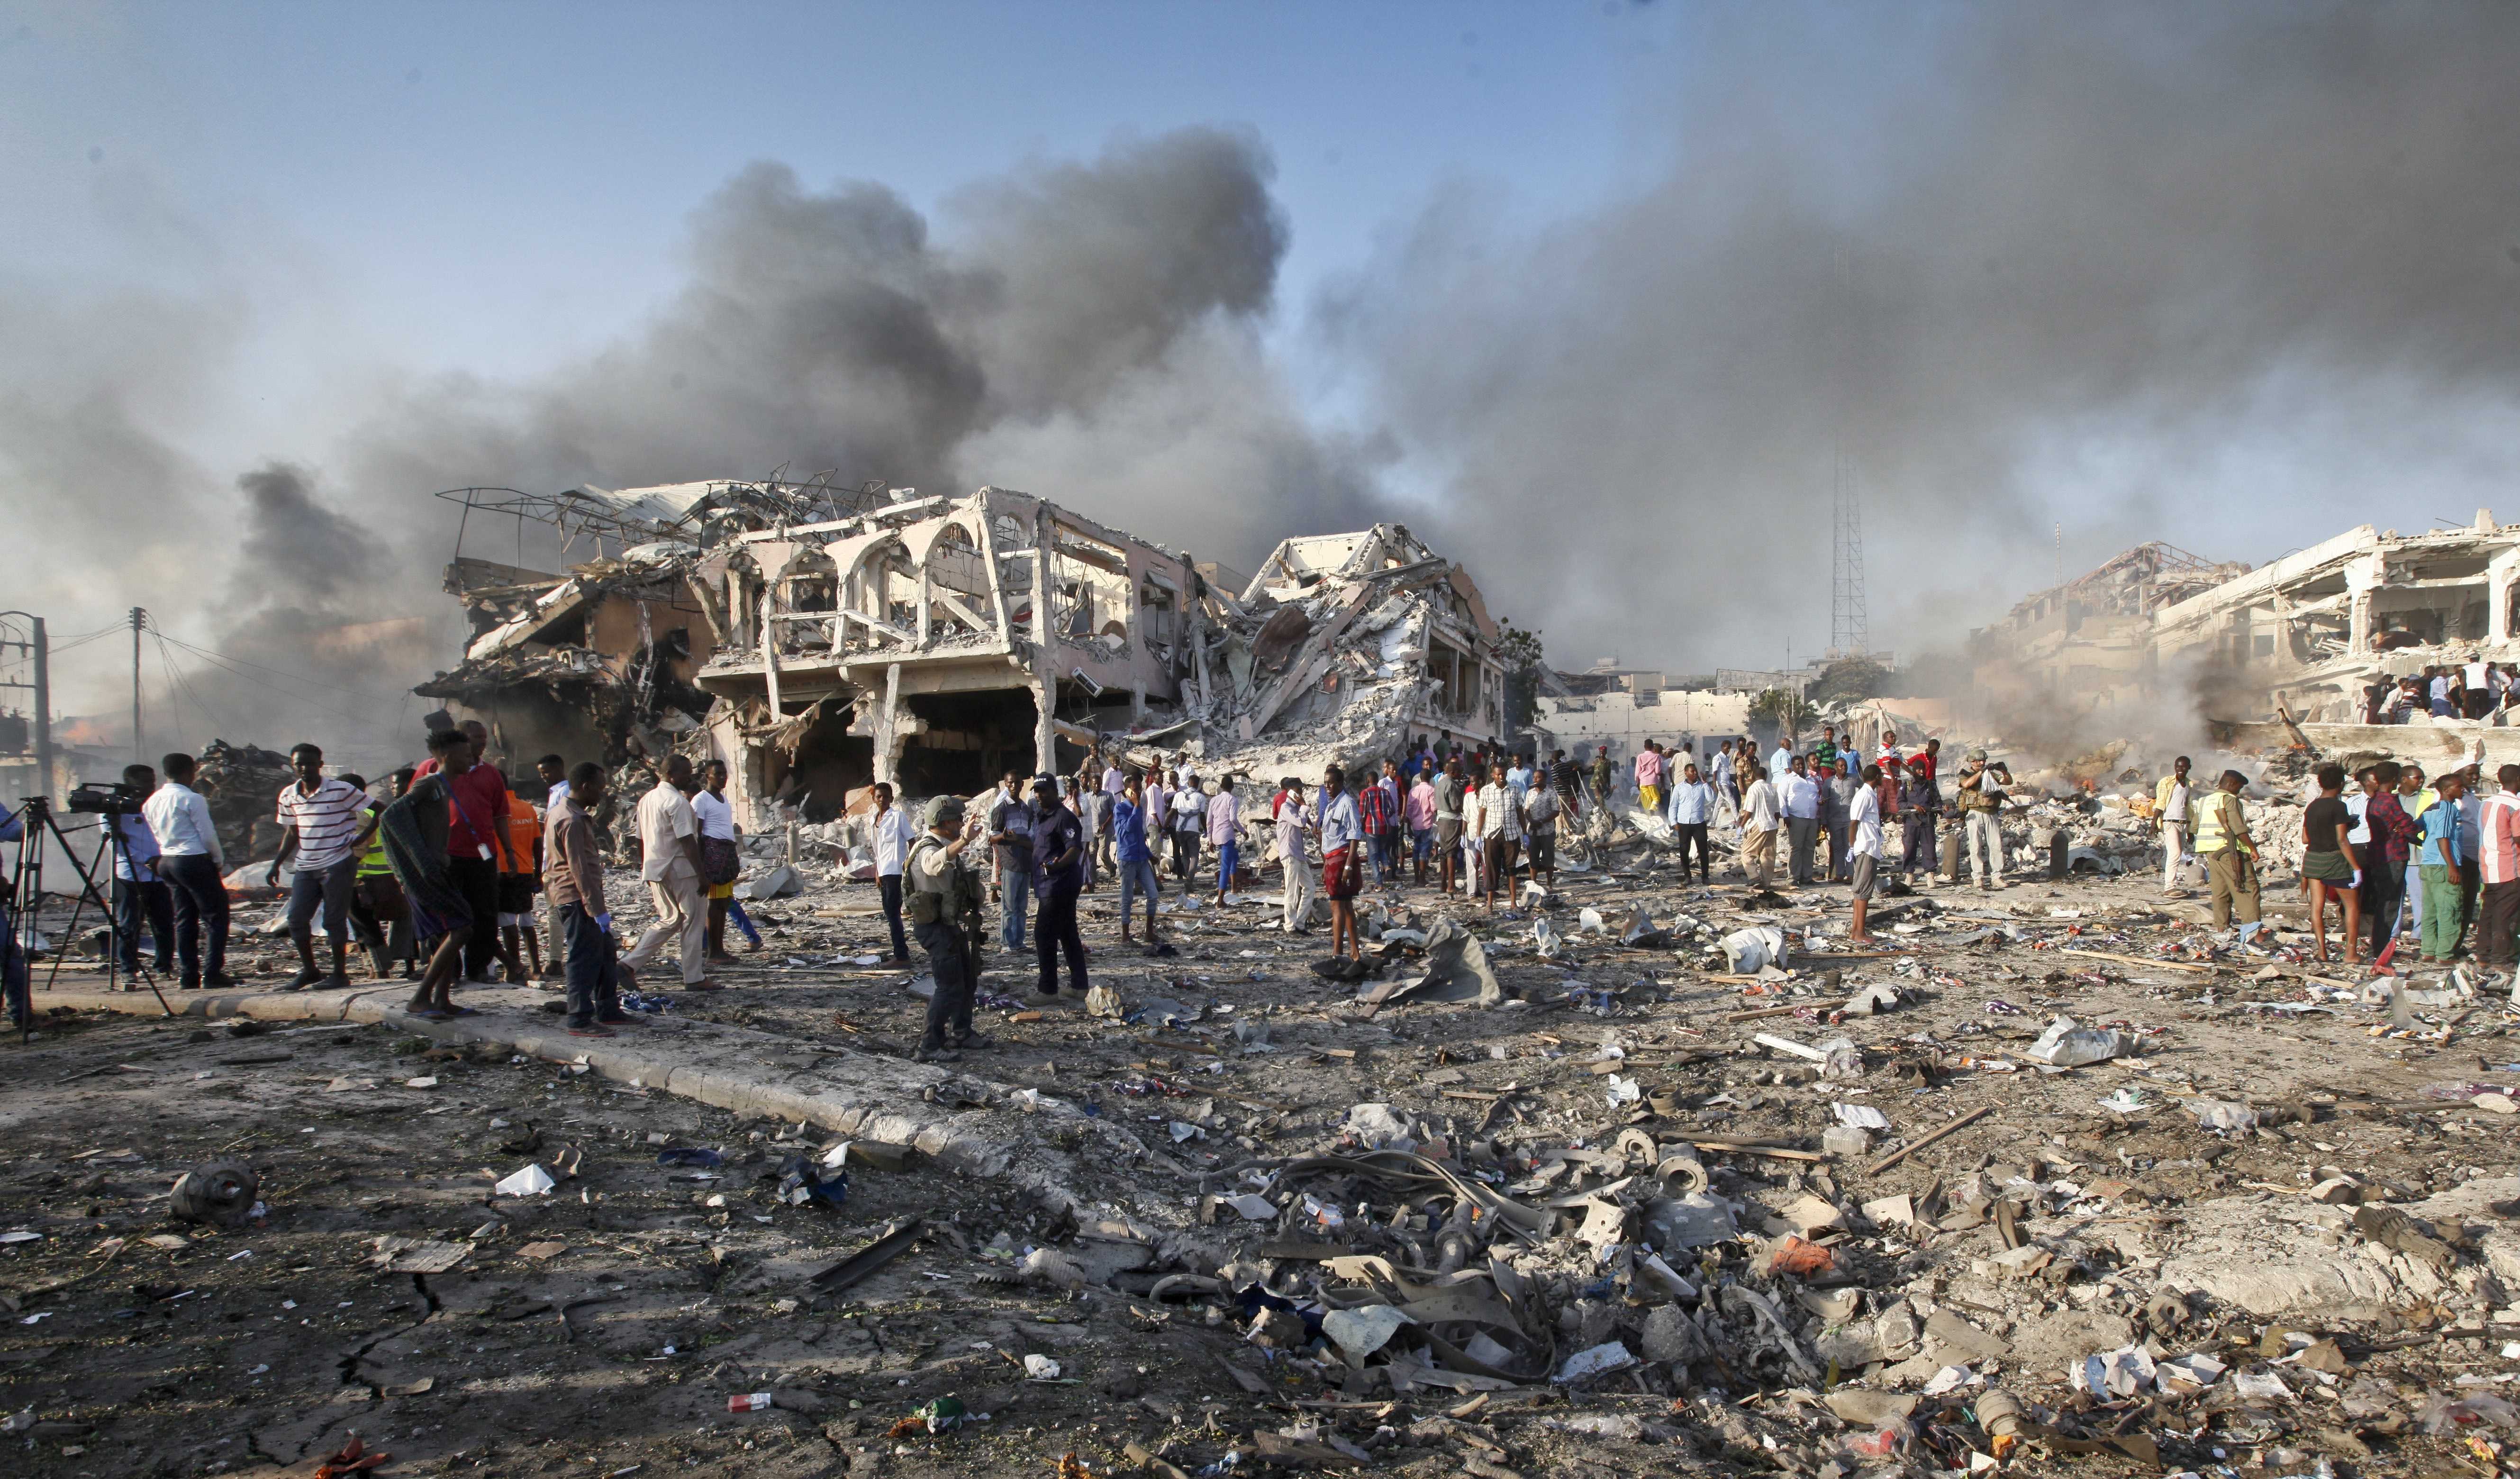 Bombing in Somalia’s capital leaves at least 276 dead